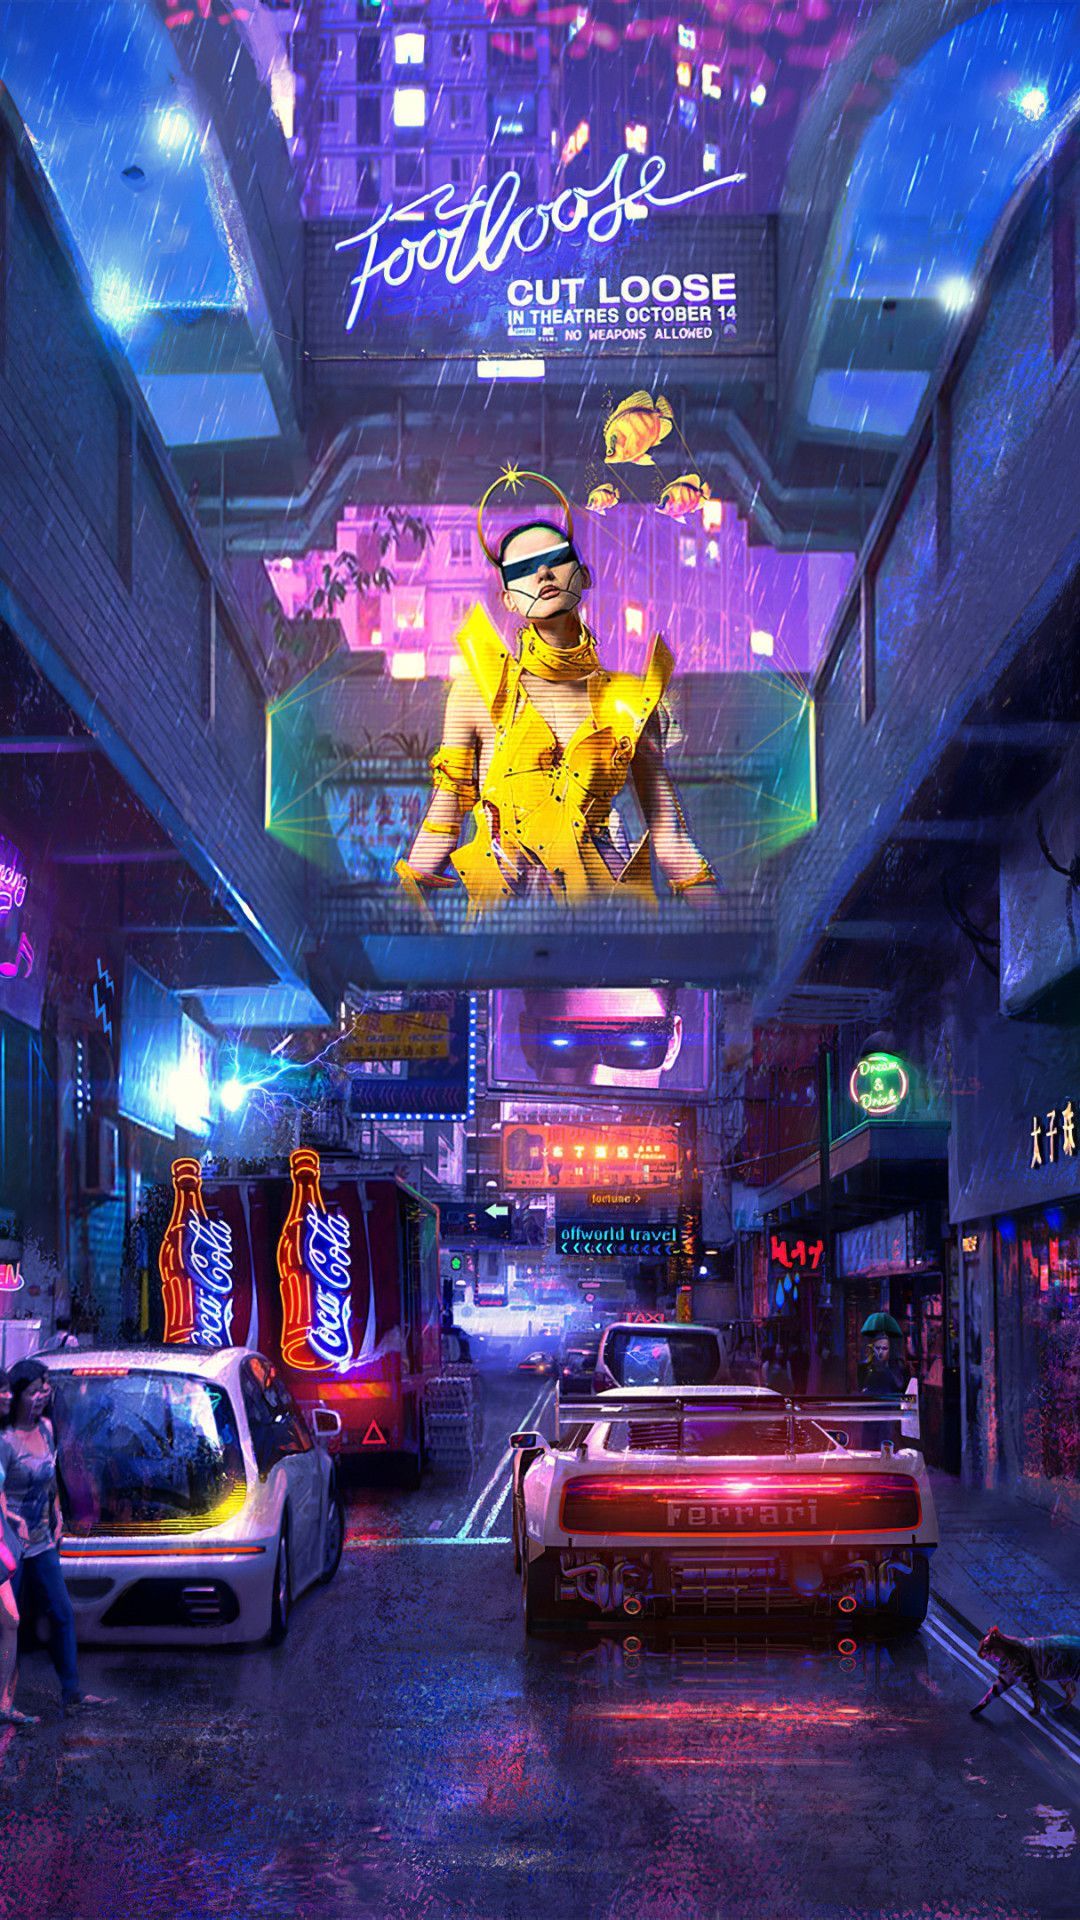 Cyber Street 4k Mobile Wallpaper (iPhone, Android, Samsung, Pixel, Xiaomi). Mobile wallpaper, Cyber, Xiaomi